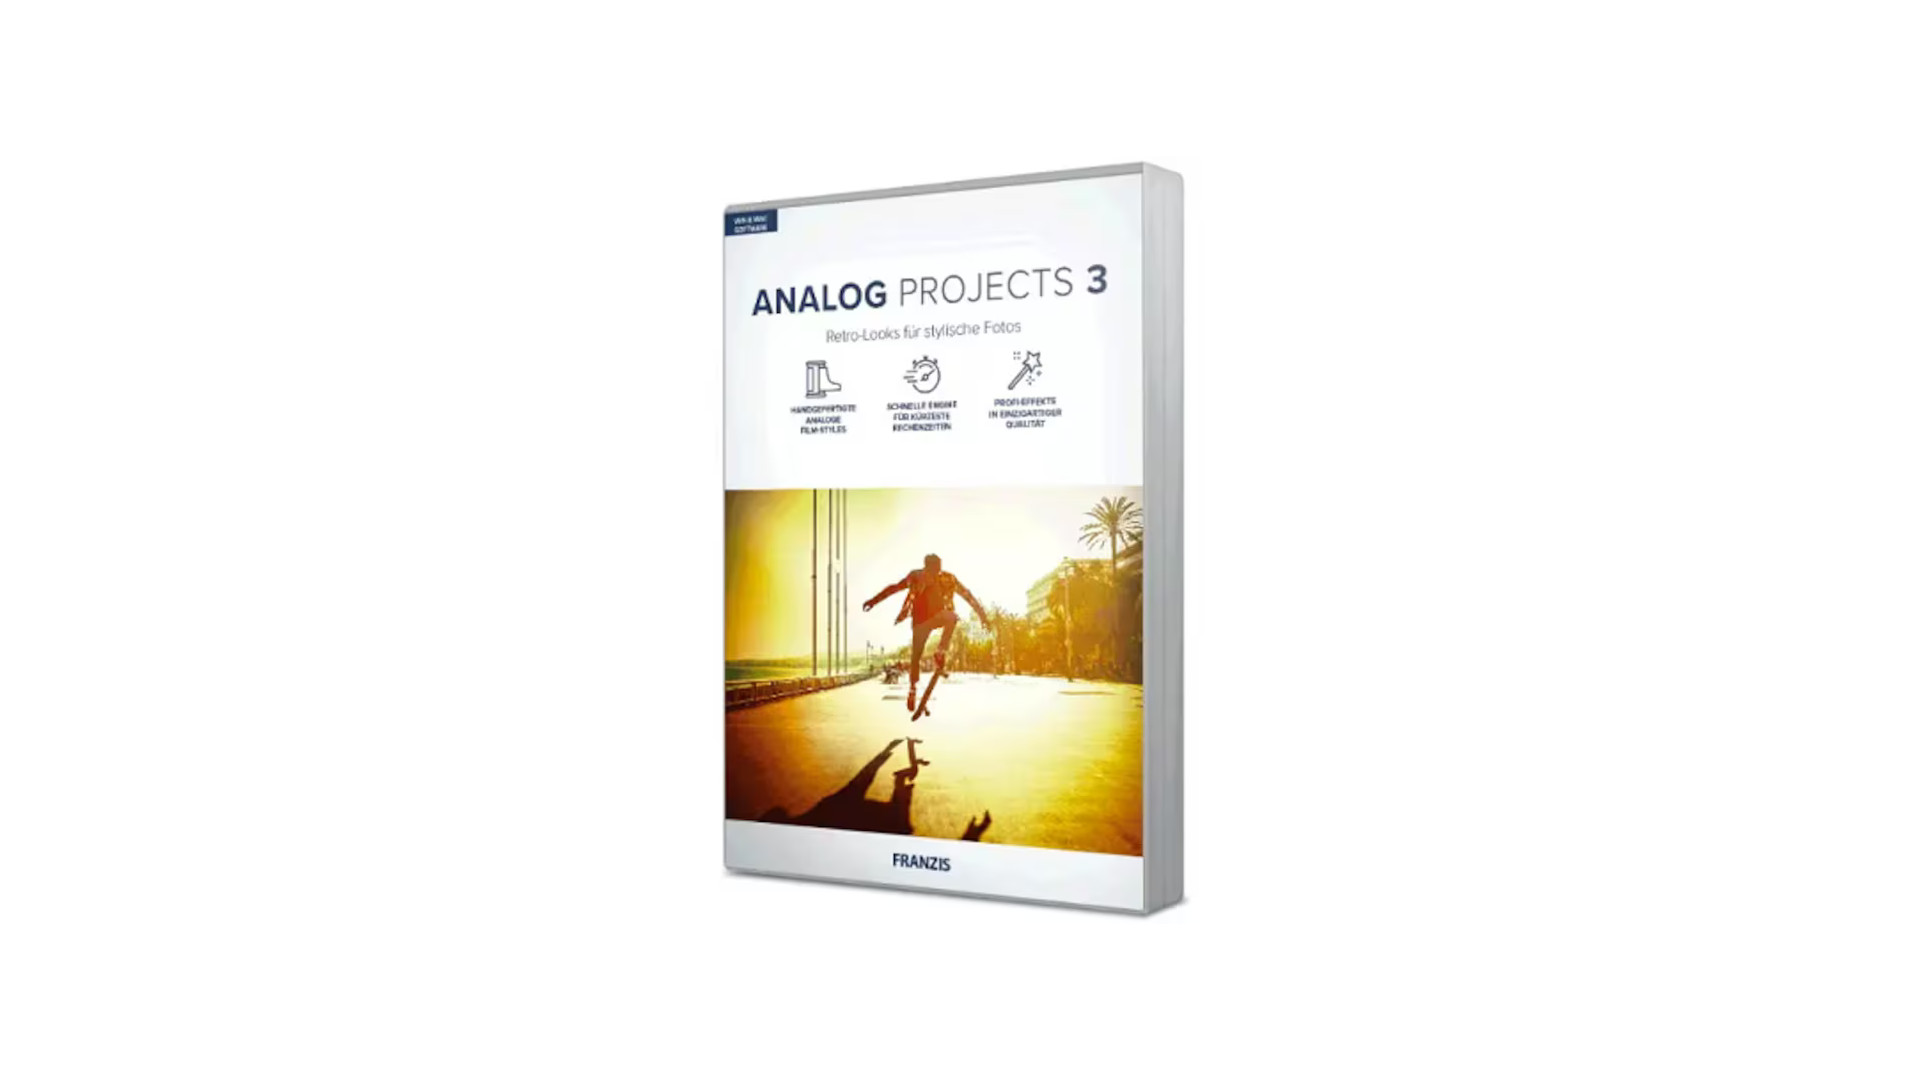 [$ 33.89] ANALOG projects 3 - Project Software Key (Lifetime / 1 PC)